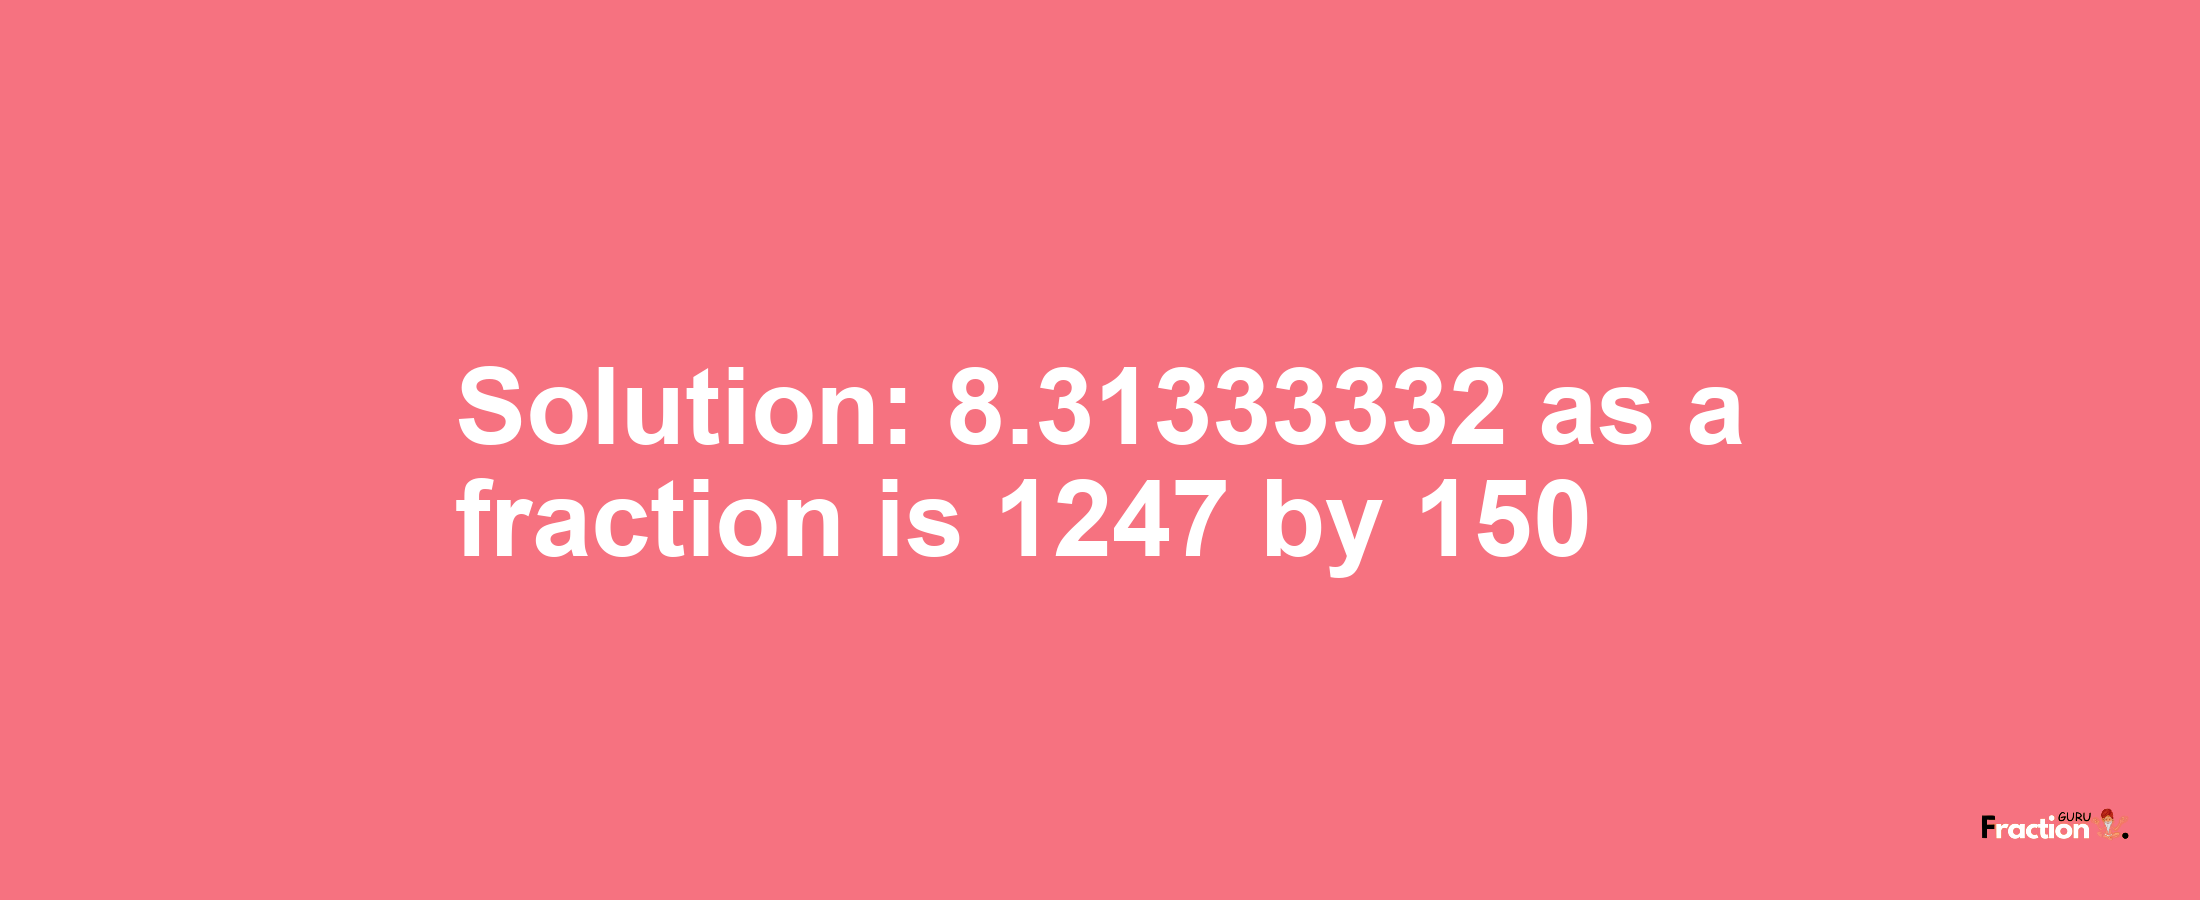 Solution:8.31333332 as a fraction is 1247/150